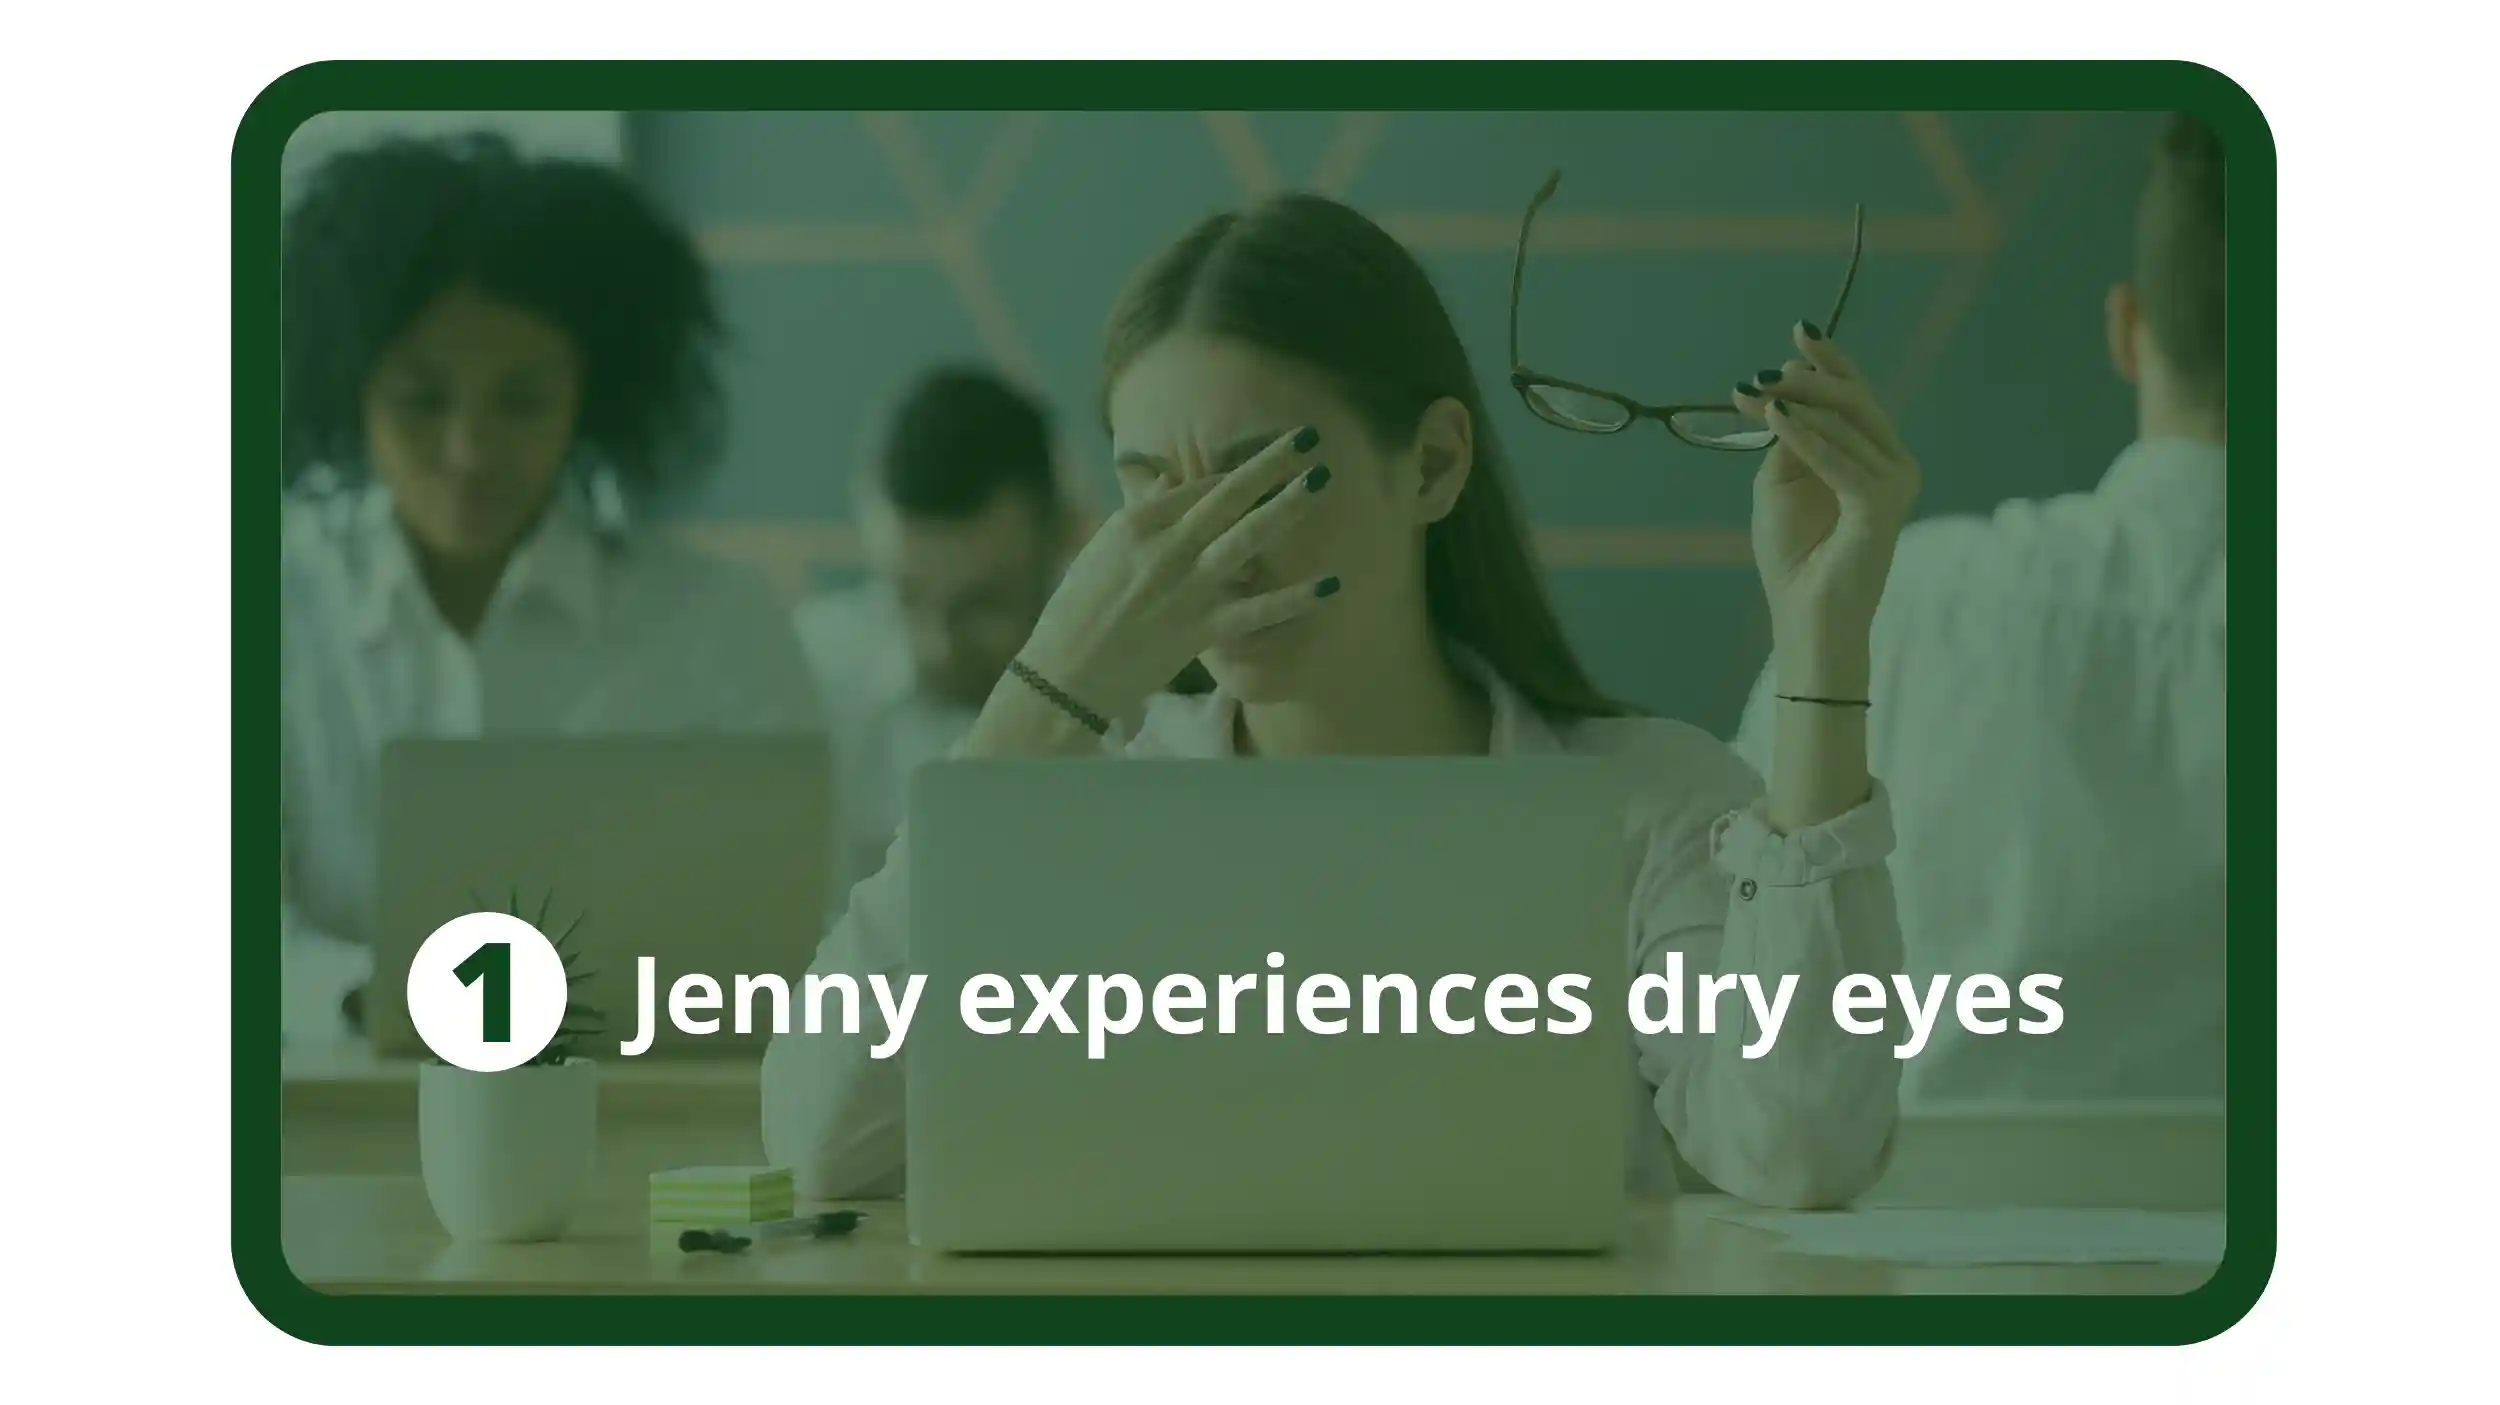 Jenny is experiencing dry eyes